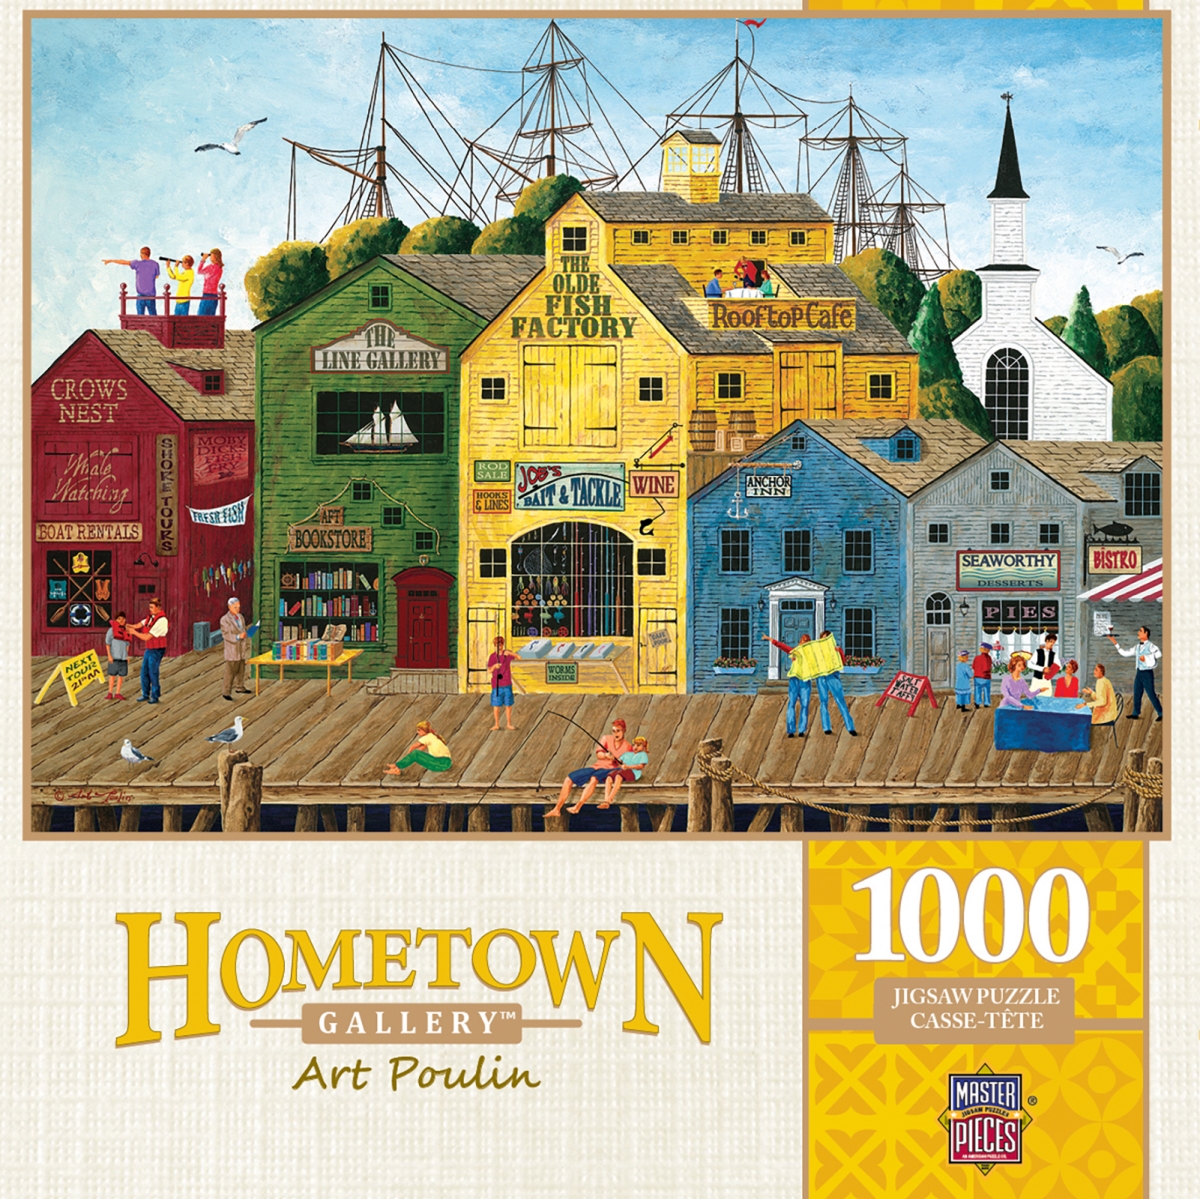 71625 19.25 X 26.75 In. Art Poulin Hometown Gallery Crows Nest Harbor Jigsaw Puzzle - 1000 Piece